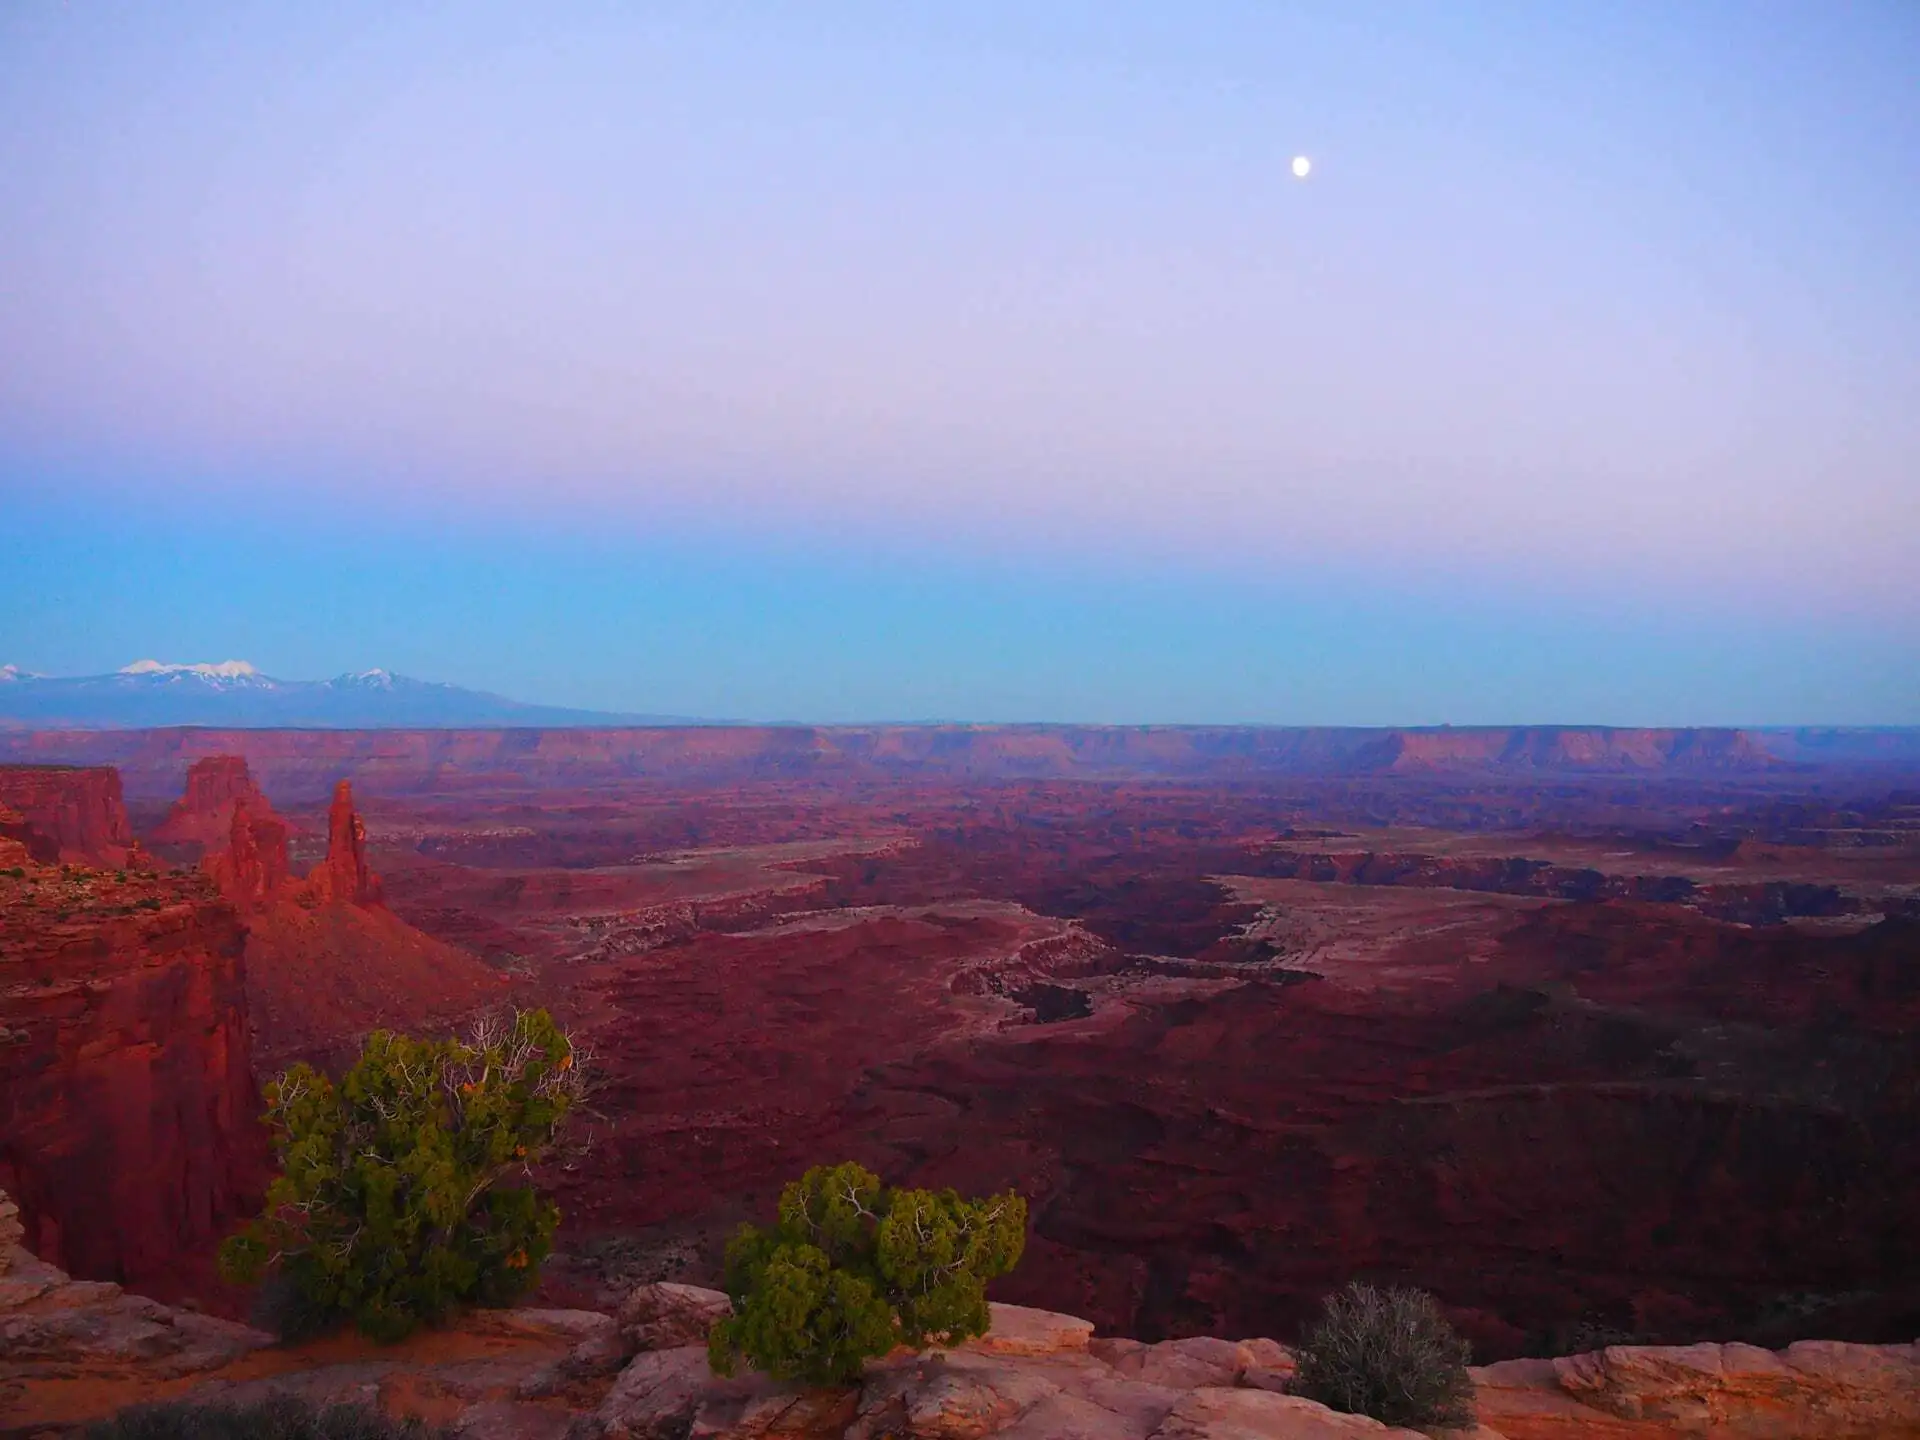 A stunning view of Canyonlands National Park at sunset